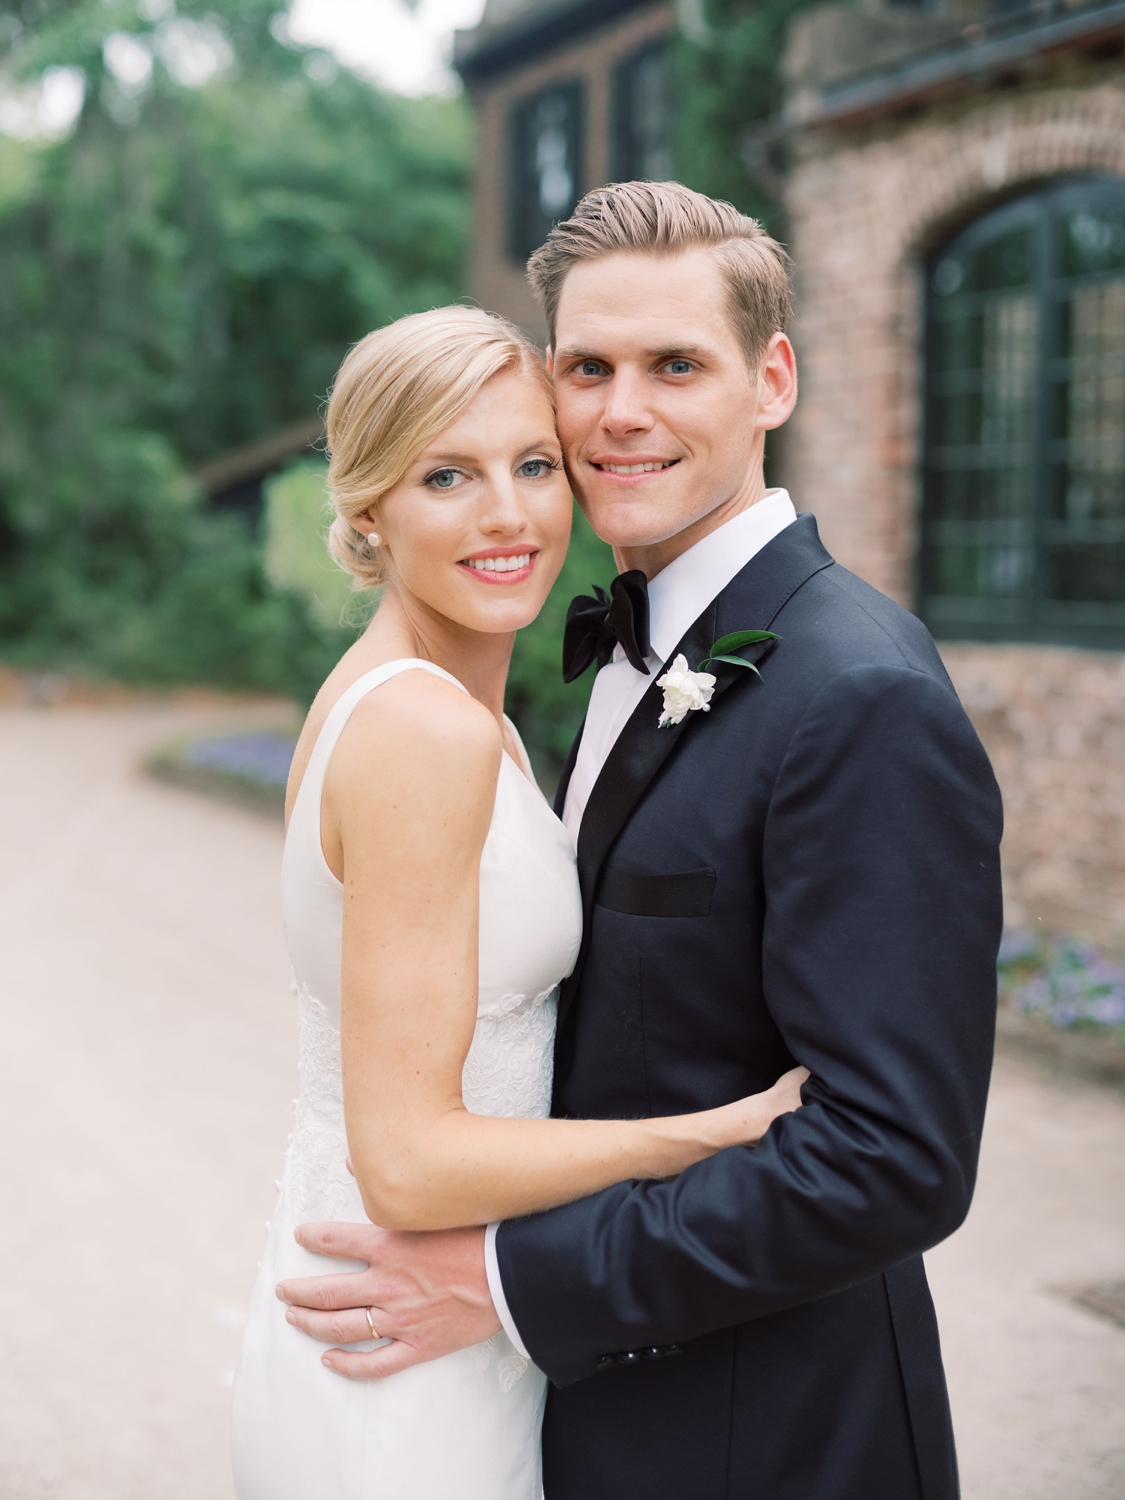 wedding at middleton place - bride and groom portrait